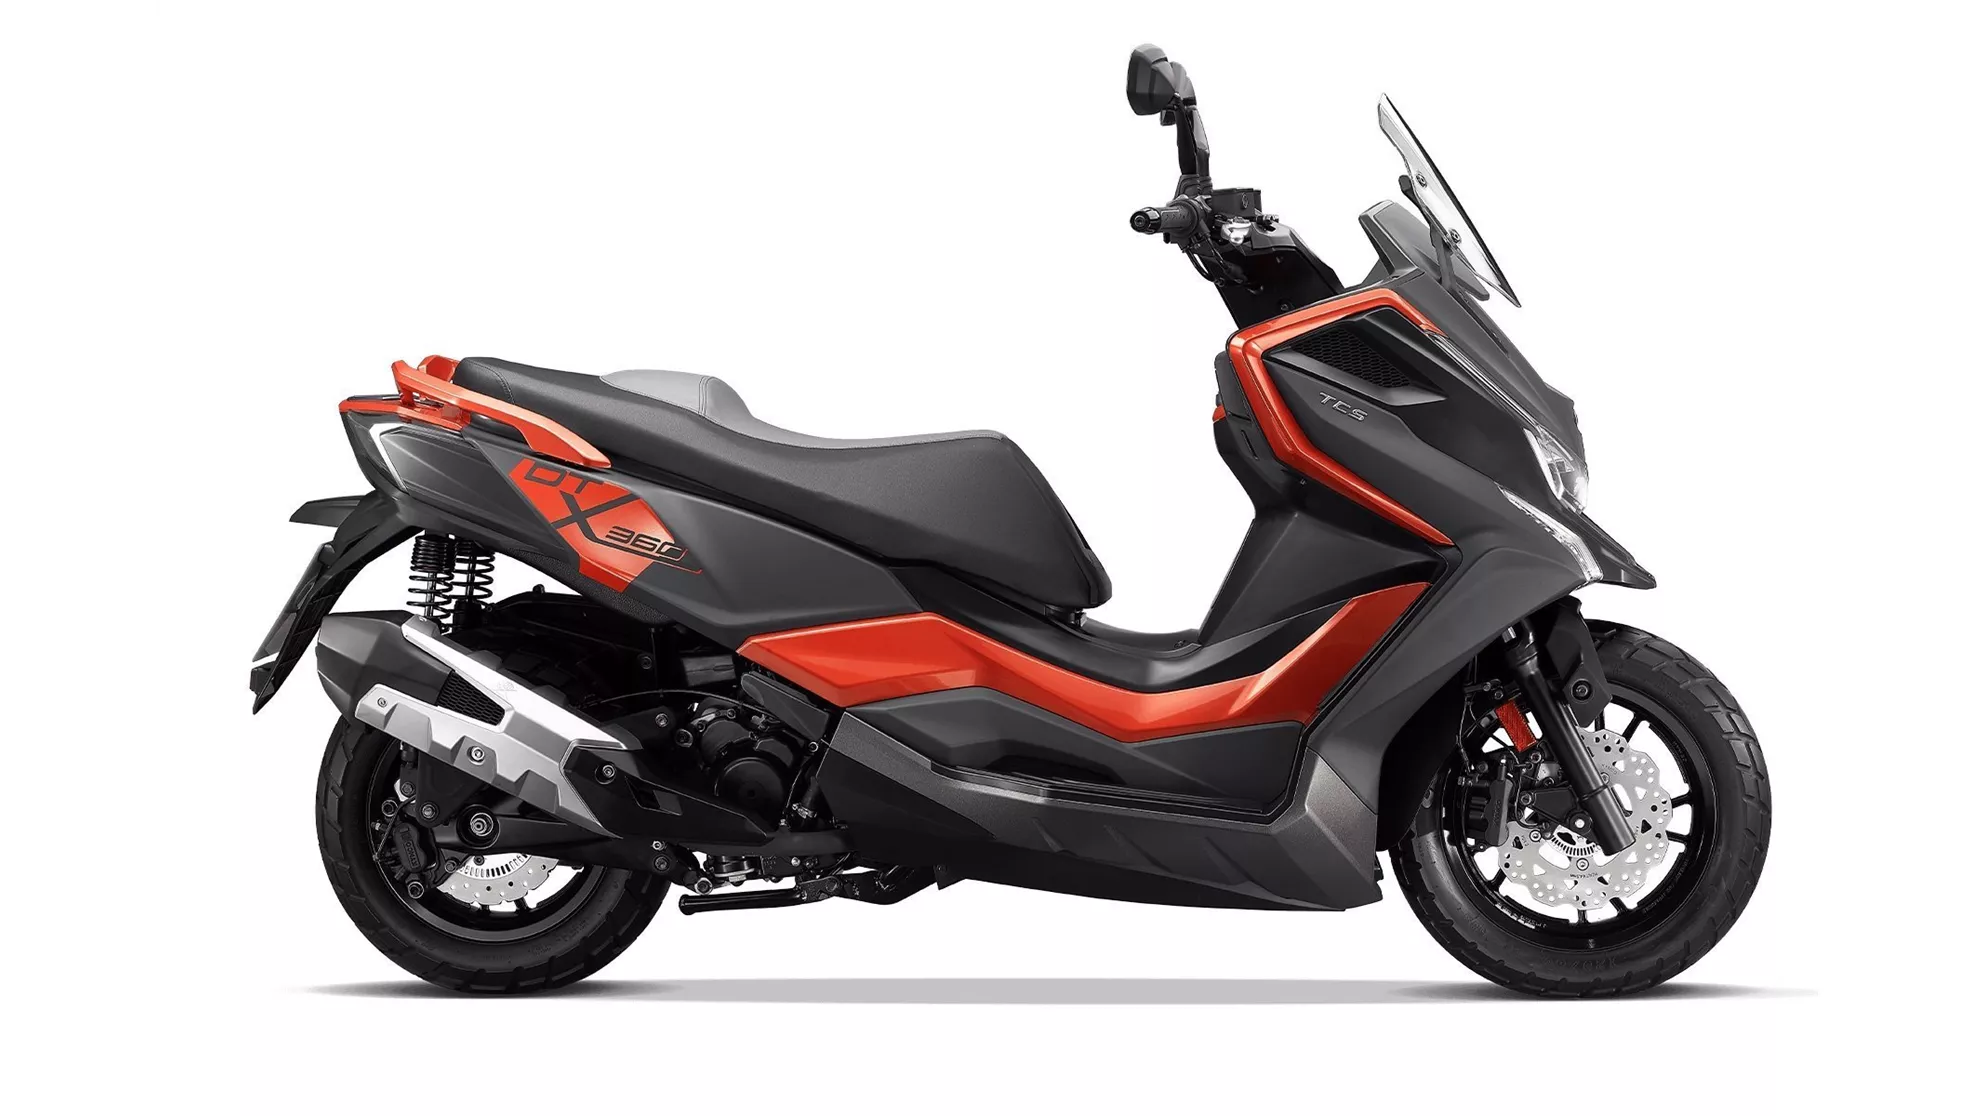 Kymco DT X360 350i ABS - Image 1